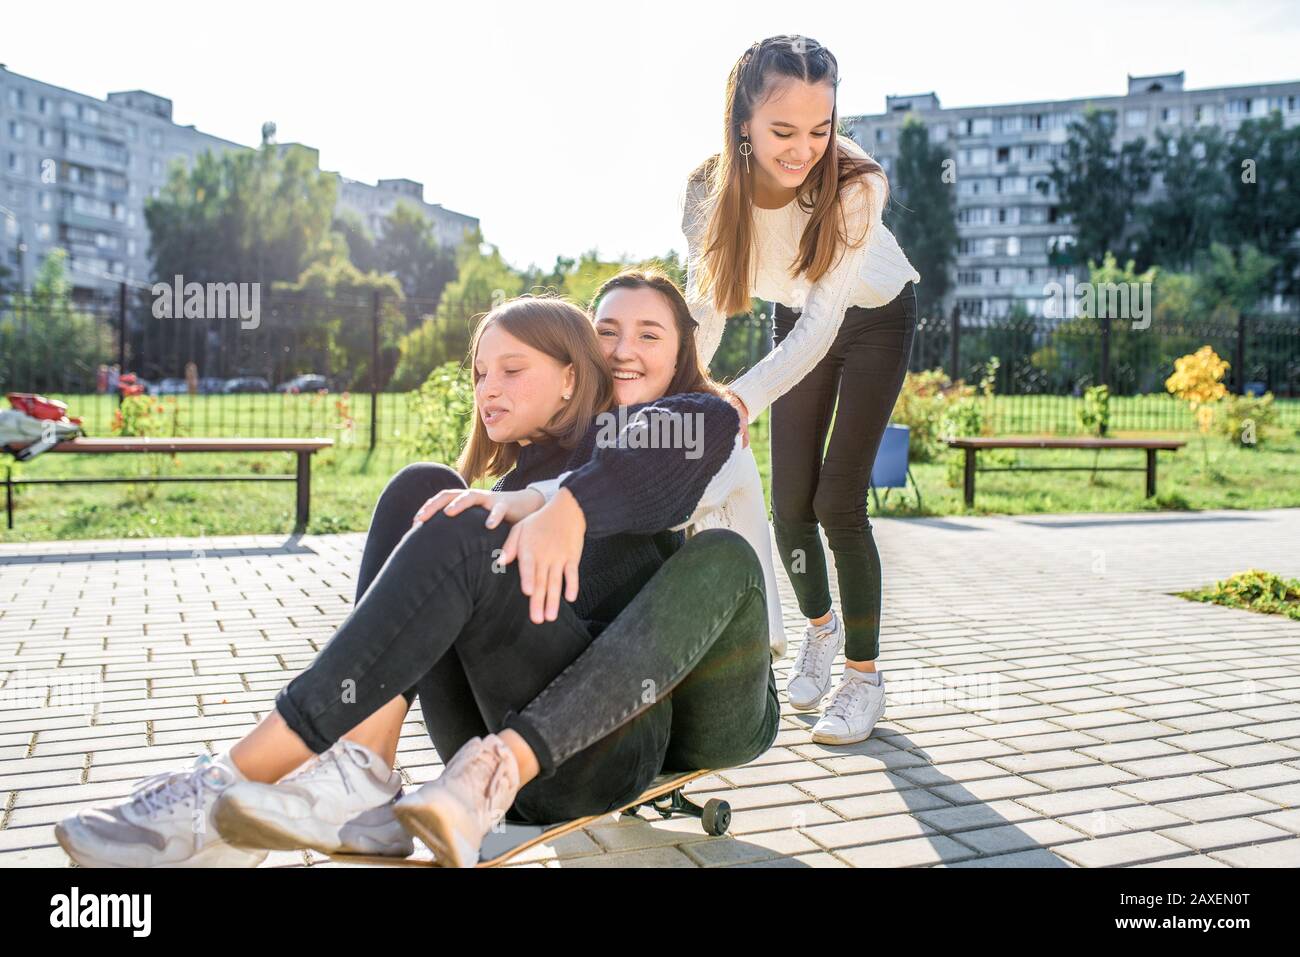 Three teenage girls of 12-14 years old, in summer in city, ride a skateboard, happy smiling, having fun and rejoicing. Weekend break. Casual clothes Stock Photo